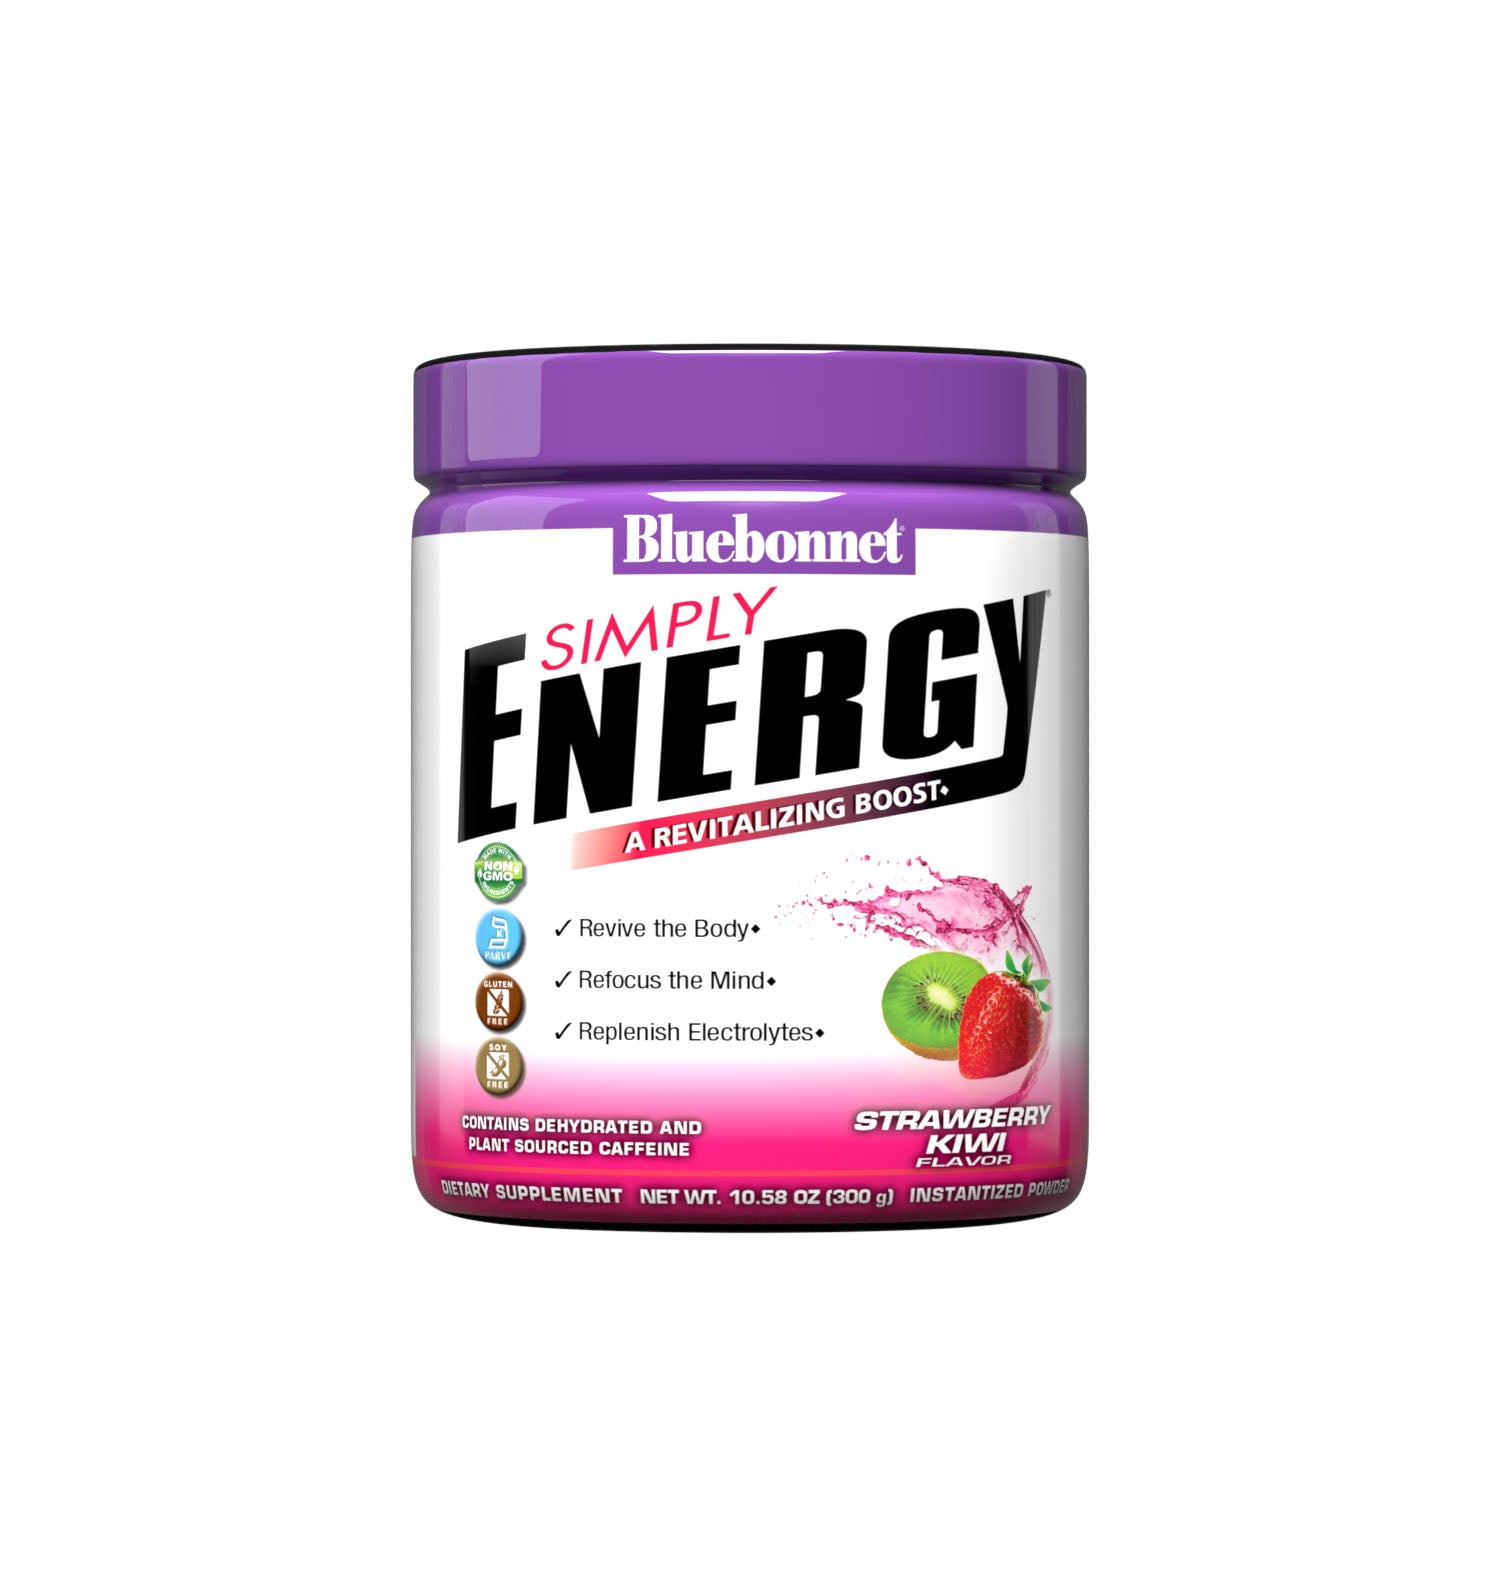 Simply Energy Powder is derived from a blend of herbal extracts, amino acids and electrolytes to help the body generate a wholesome surge of energy. The amino acids, L-arginine, L-citrulline and beta-alanine, have been incorporated to enhance blood flow, as well as theanine to help the mind reach optimal mental clarity. #size_10.58 oz